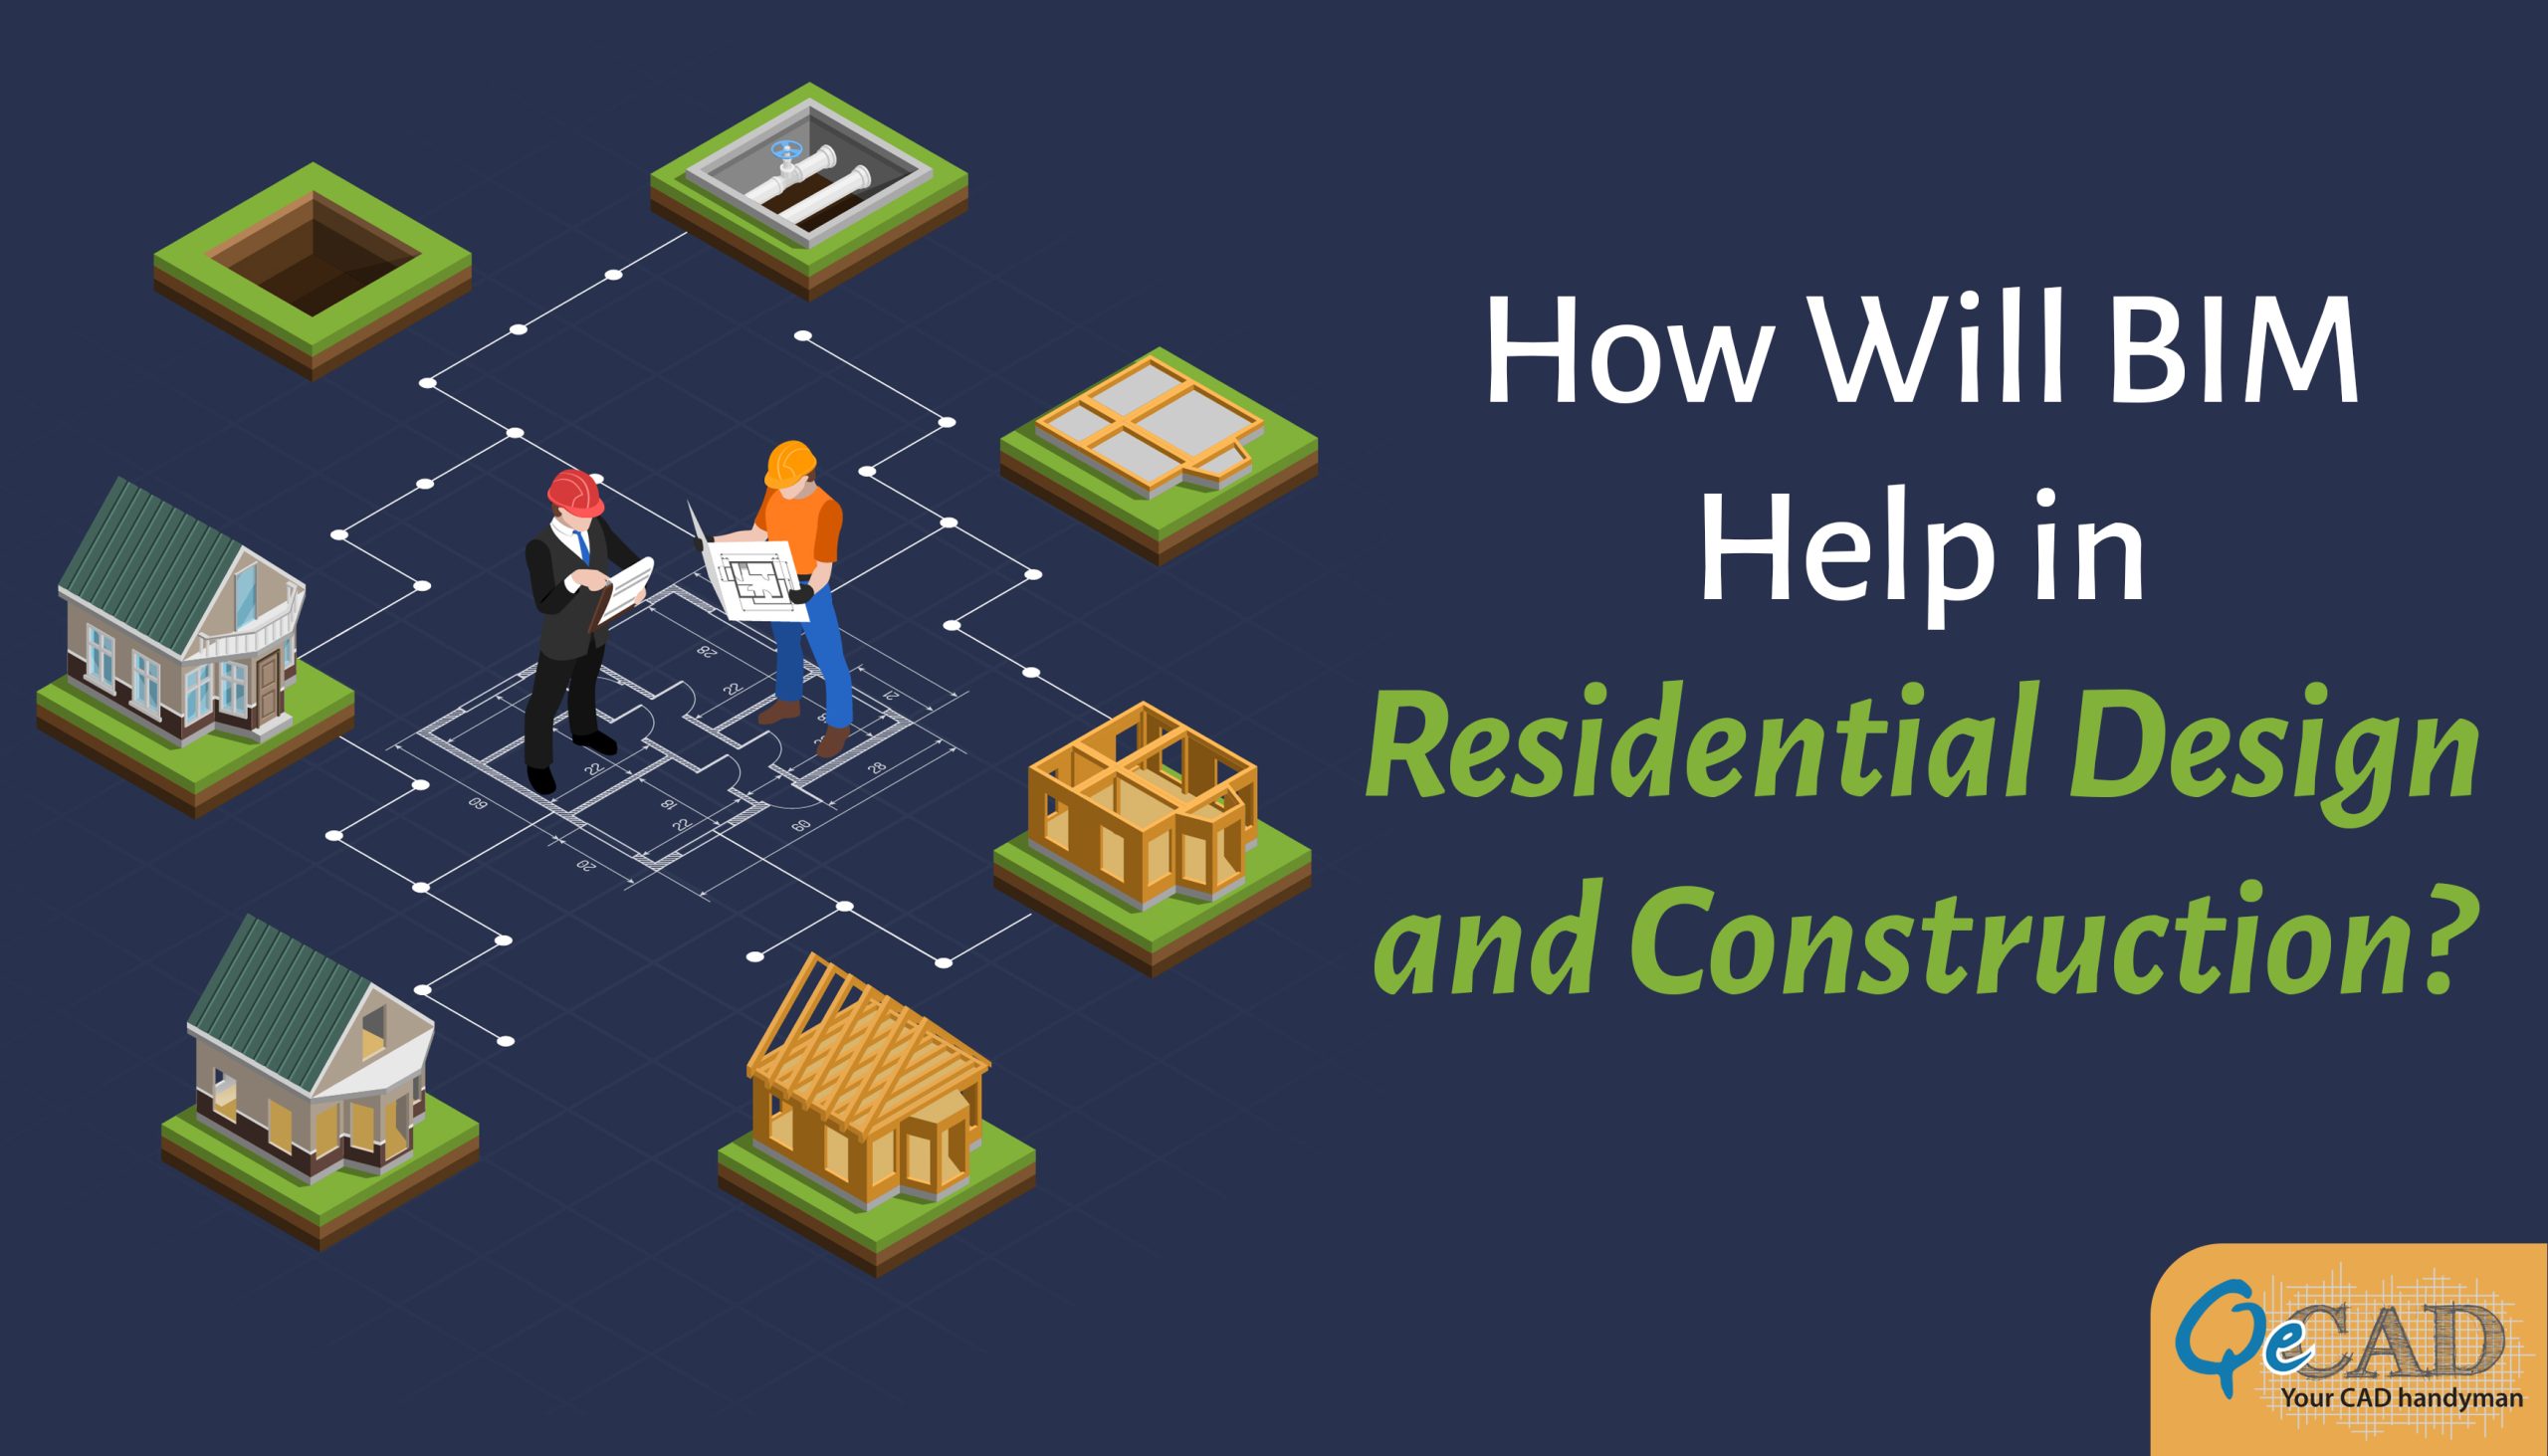 How Will BIM Help in Residential Design and Construction?